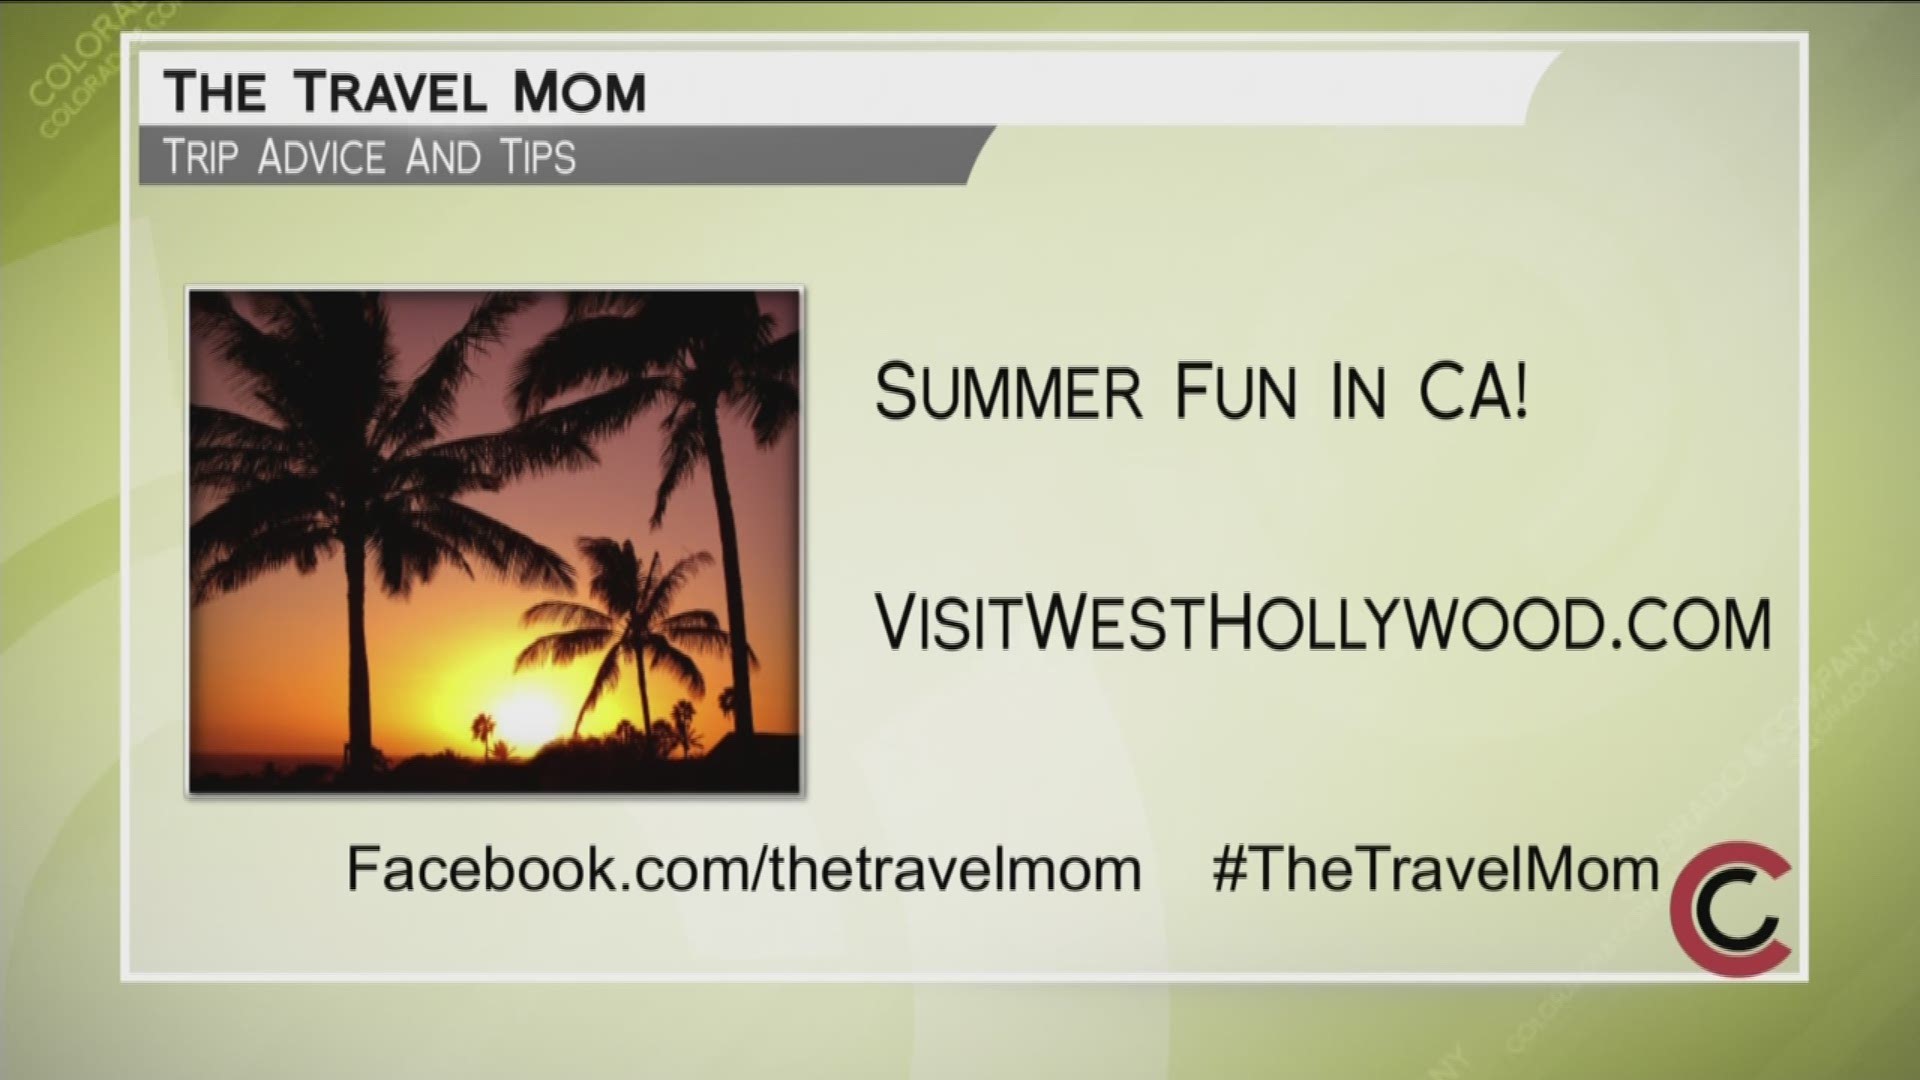 Pack and go with travel tips from the Travel Mom, Emily Kaufman. Learn more about how to plan the perfect West Hollywood Experience at www.VisitWestHollywood.com. 
THIS INTERVIEW HAS COMMERCIAL CONTENT. PRODUCTS AND SERVICES FEATURED APPEAR AS PAID ADVERTISING.